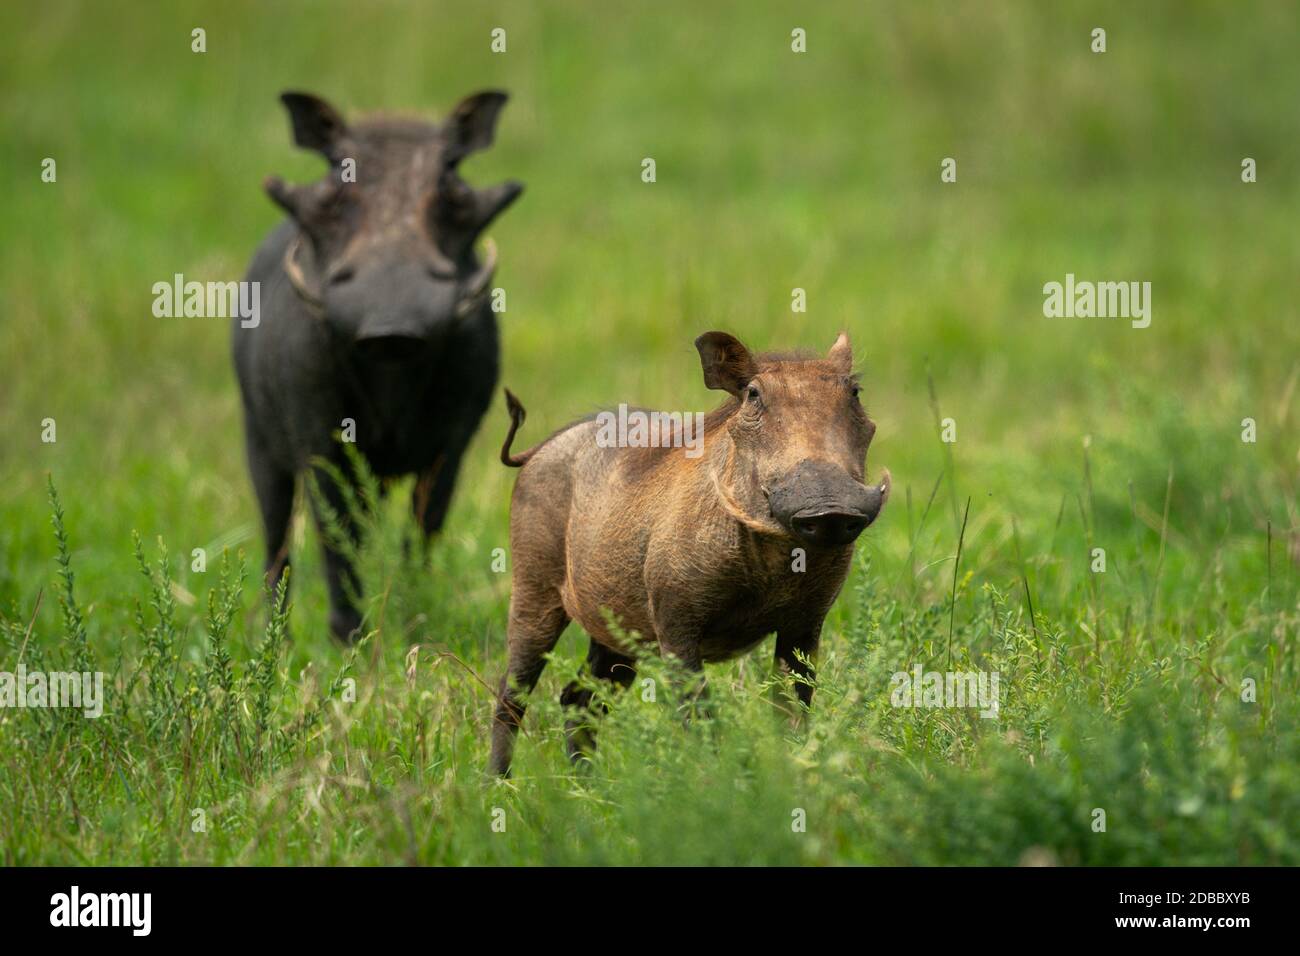 Two common warthog standing in long grass Stock Photo